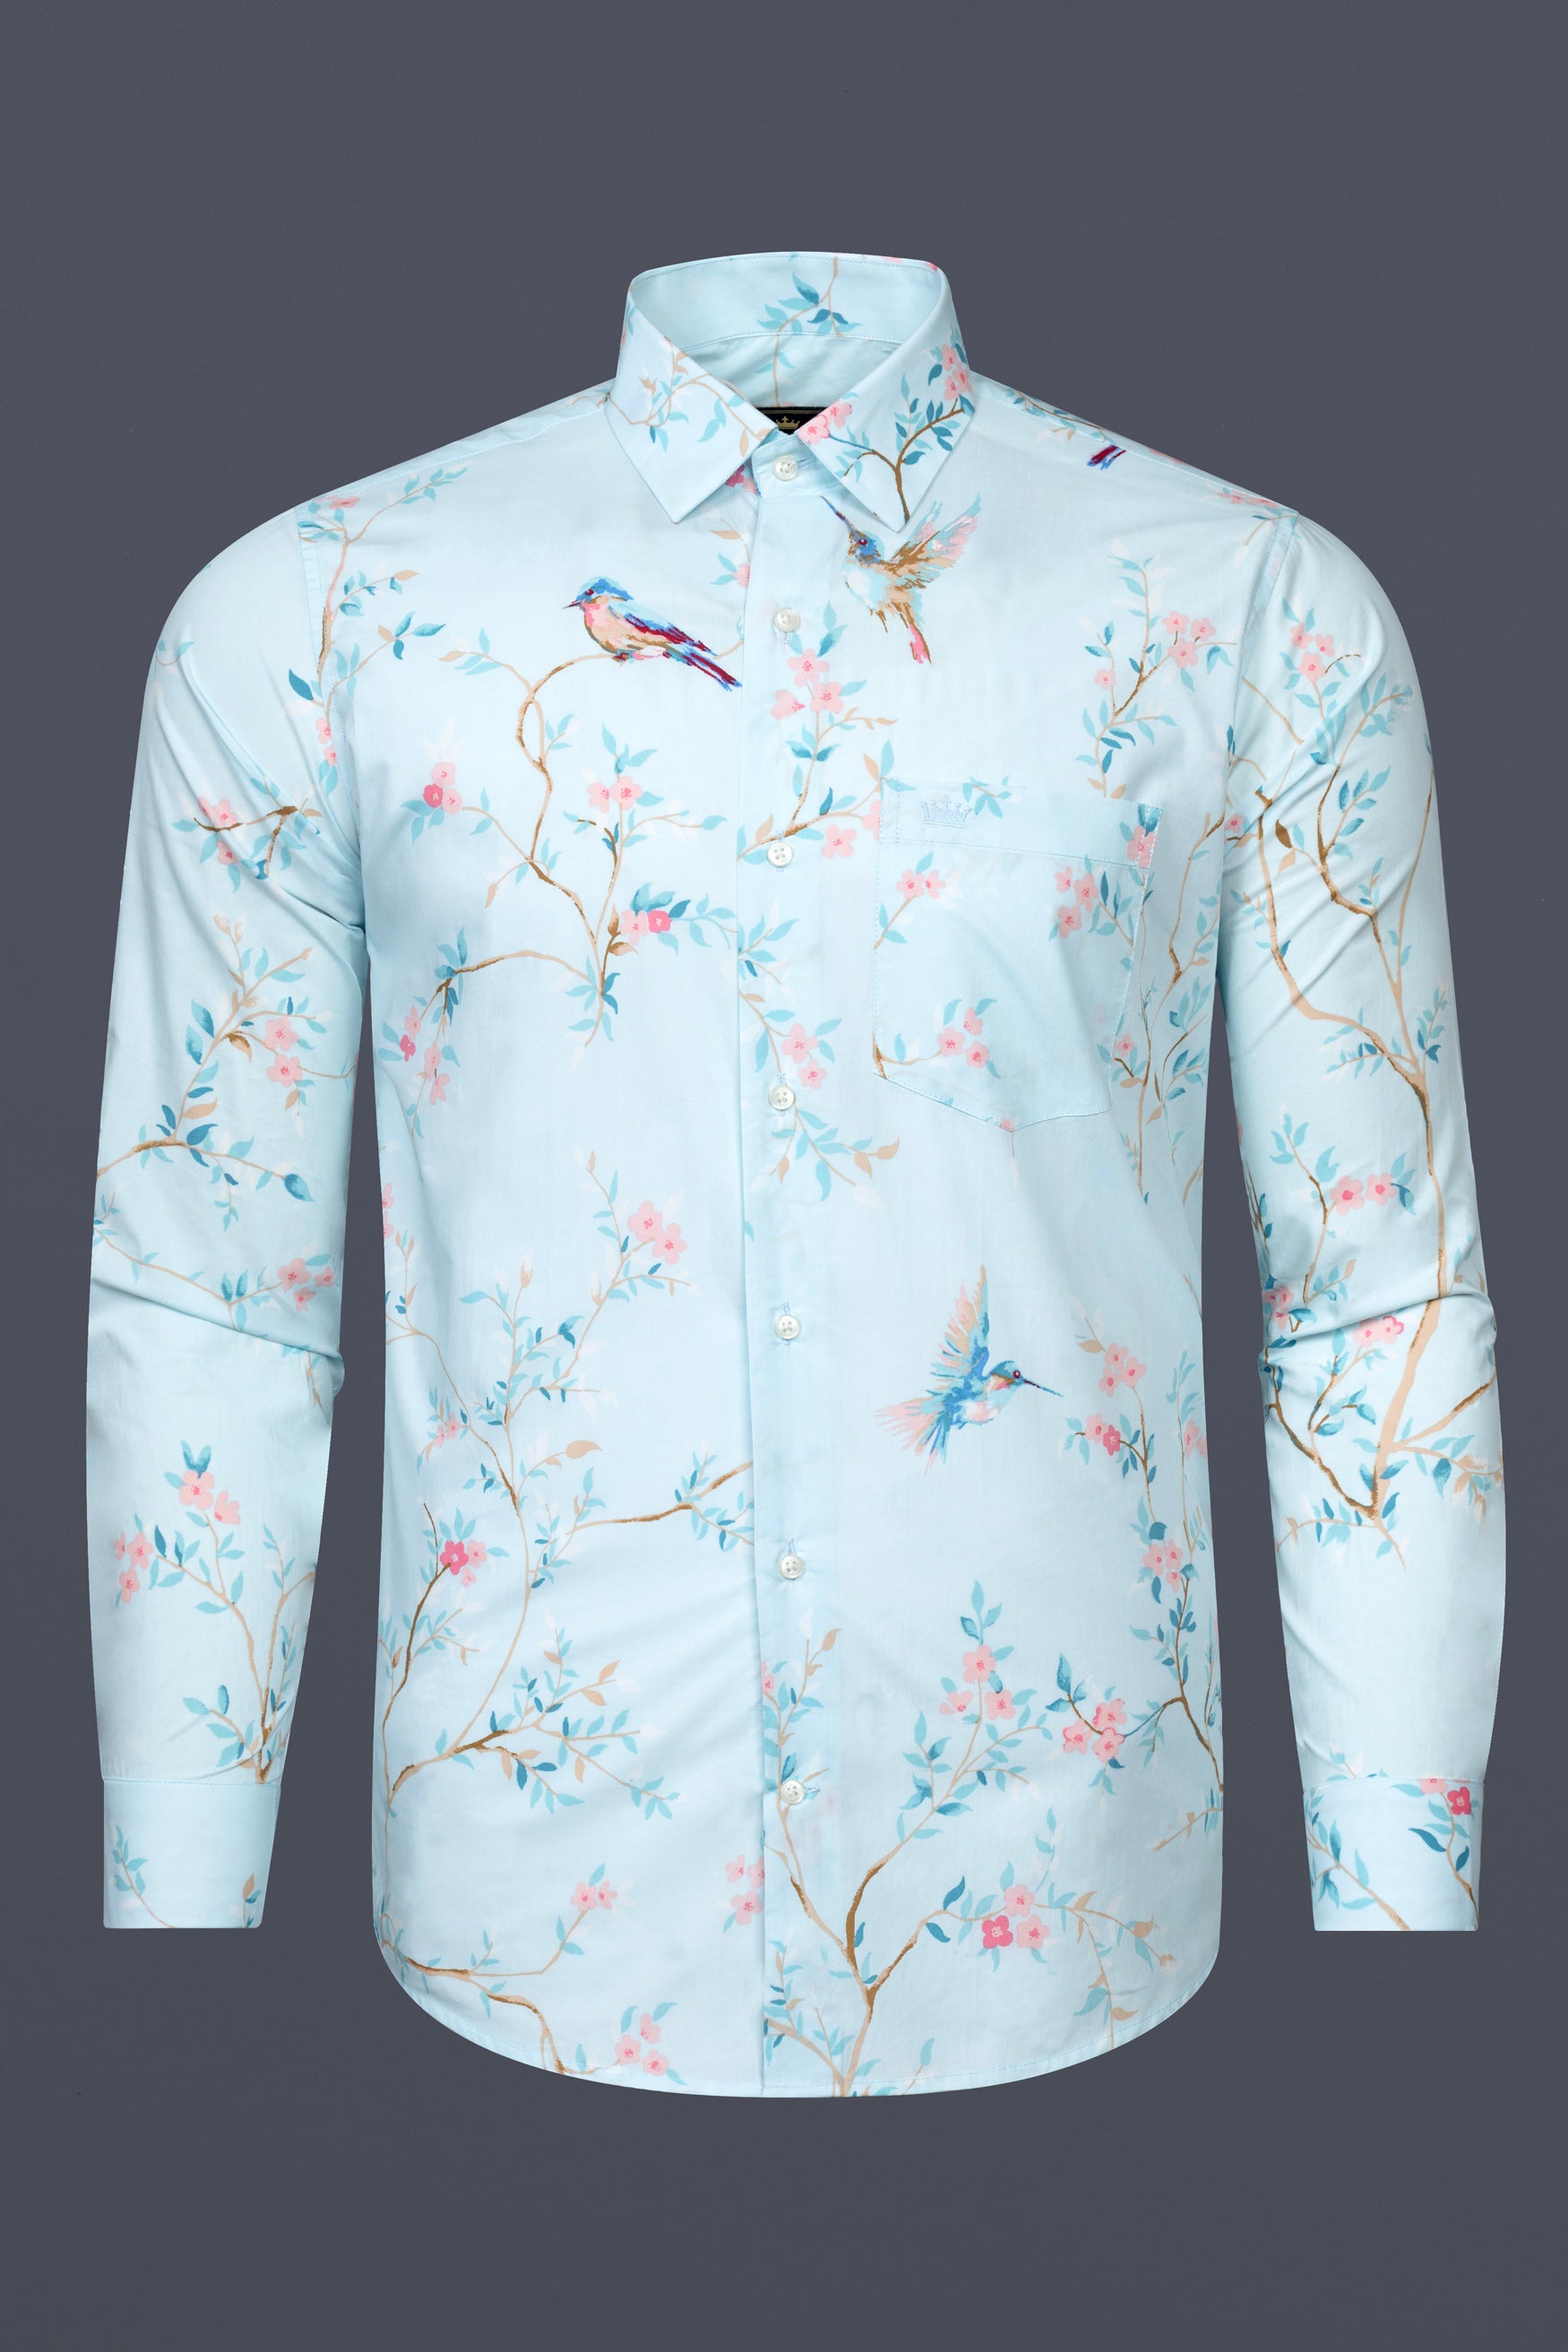 Botticelli Blue with Oyster Pink Flowers and Sparrows Printed Super Soft Premium Cotton Shirt